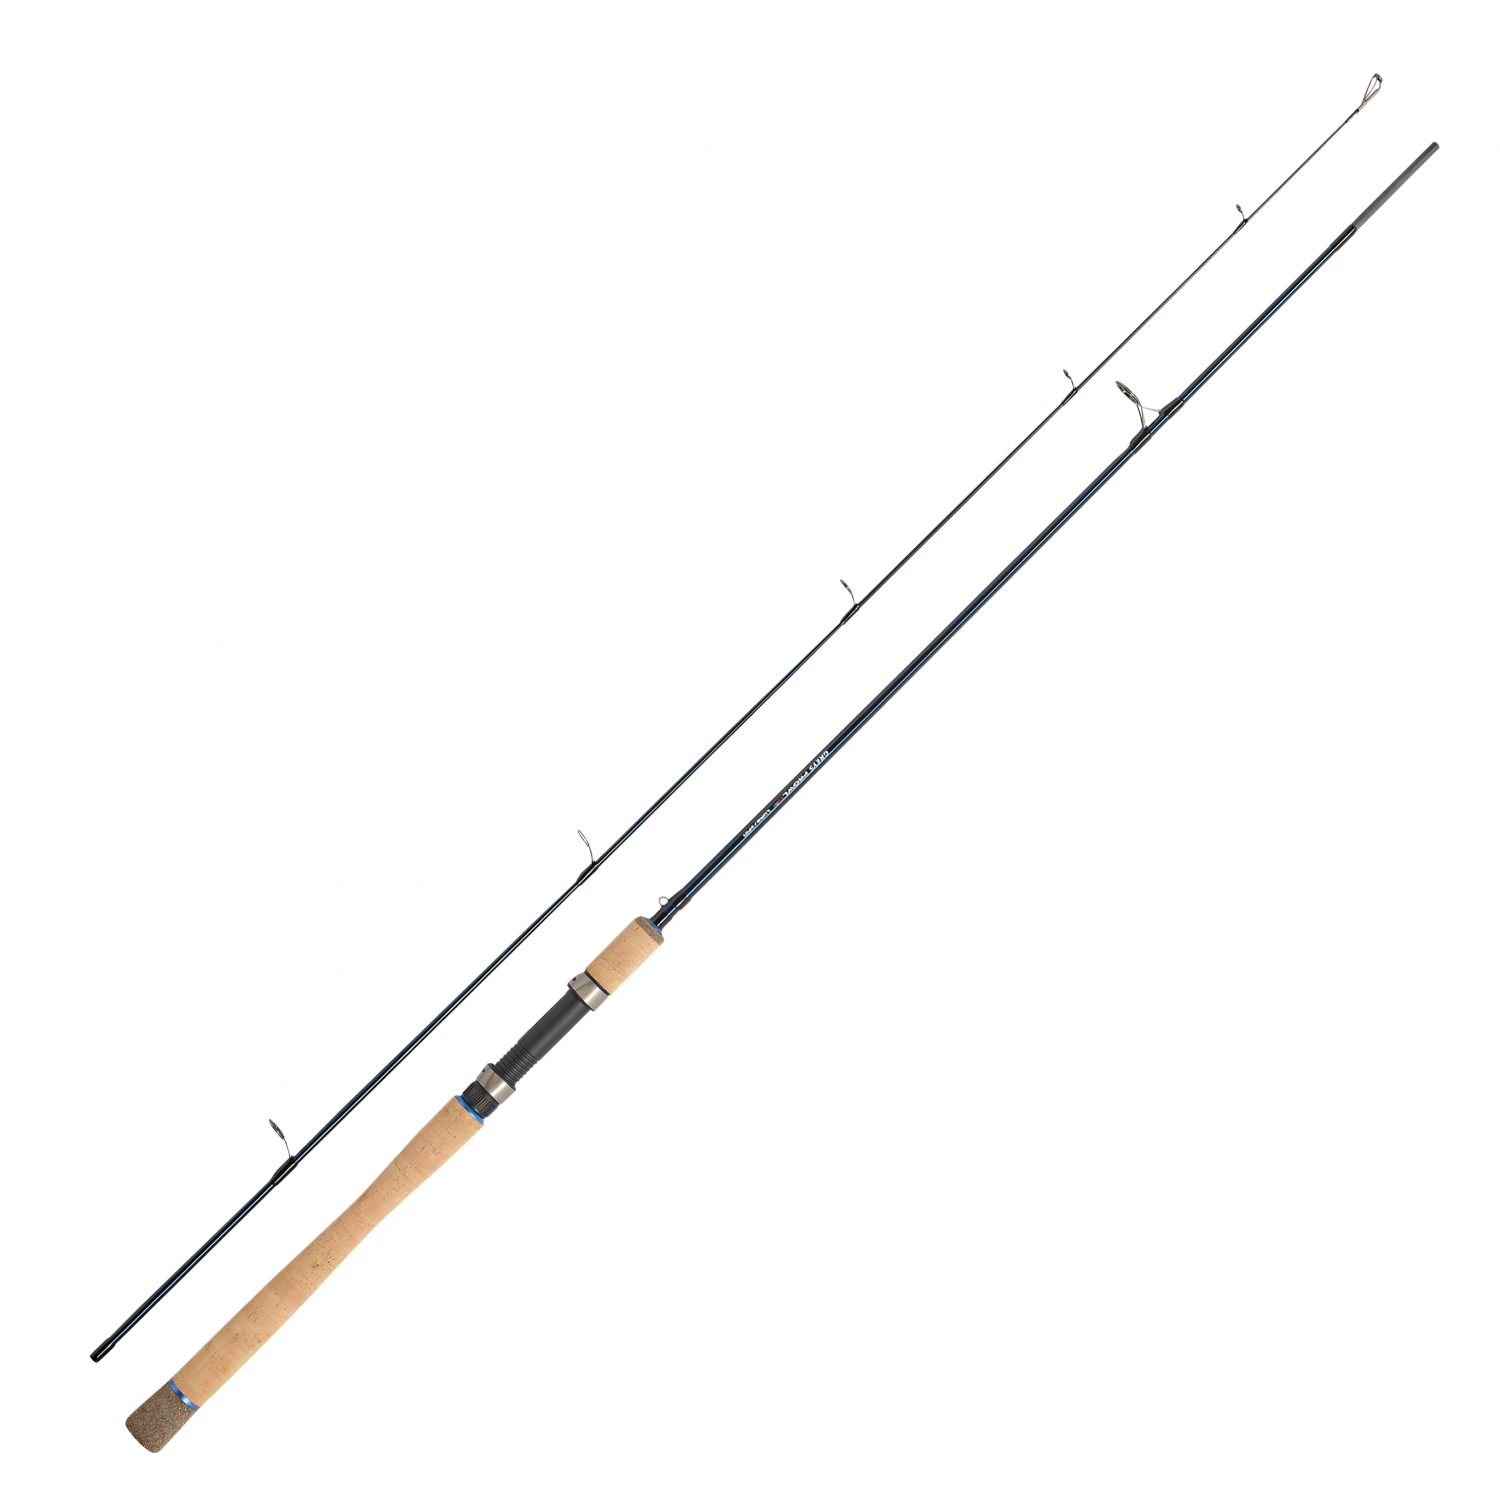 Greys Greys Prowla GS Spinnruten - Fishing Rod at low prices